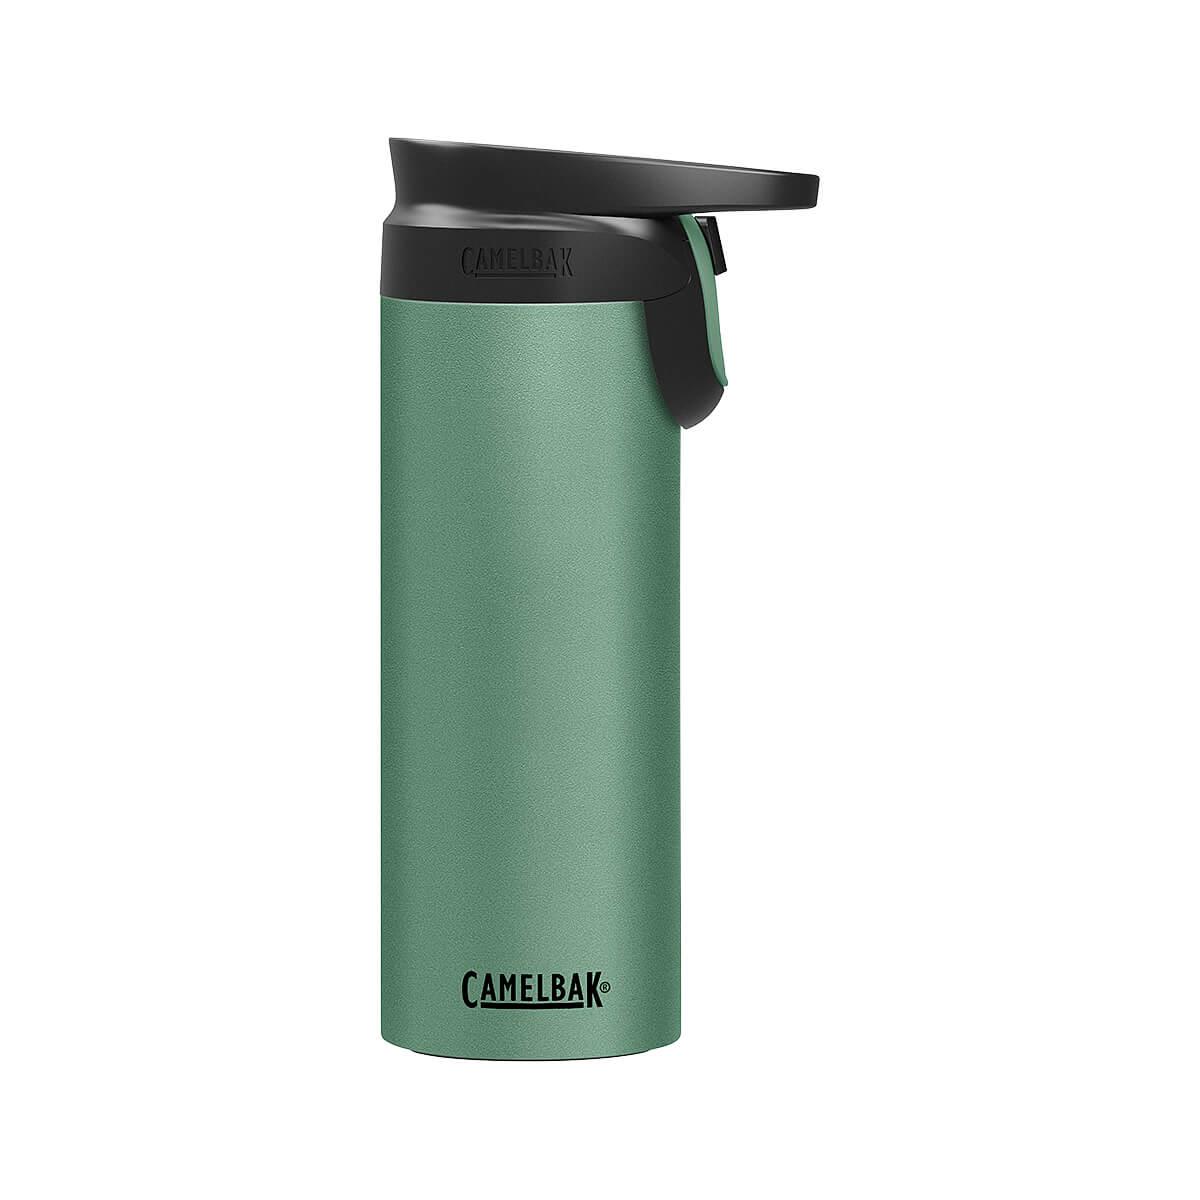 Case XX Double-Walled Spill-Proof Stainless Steel Travel Mug